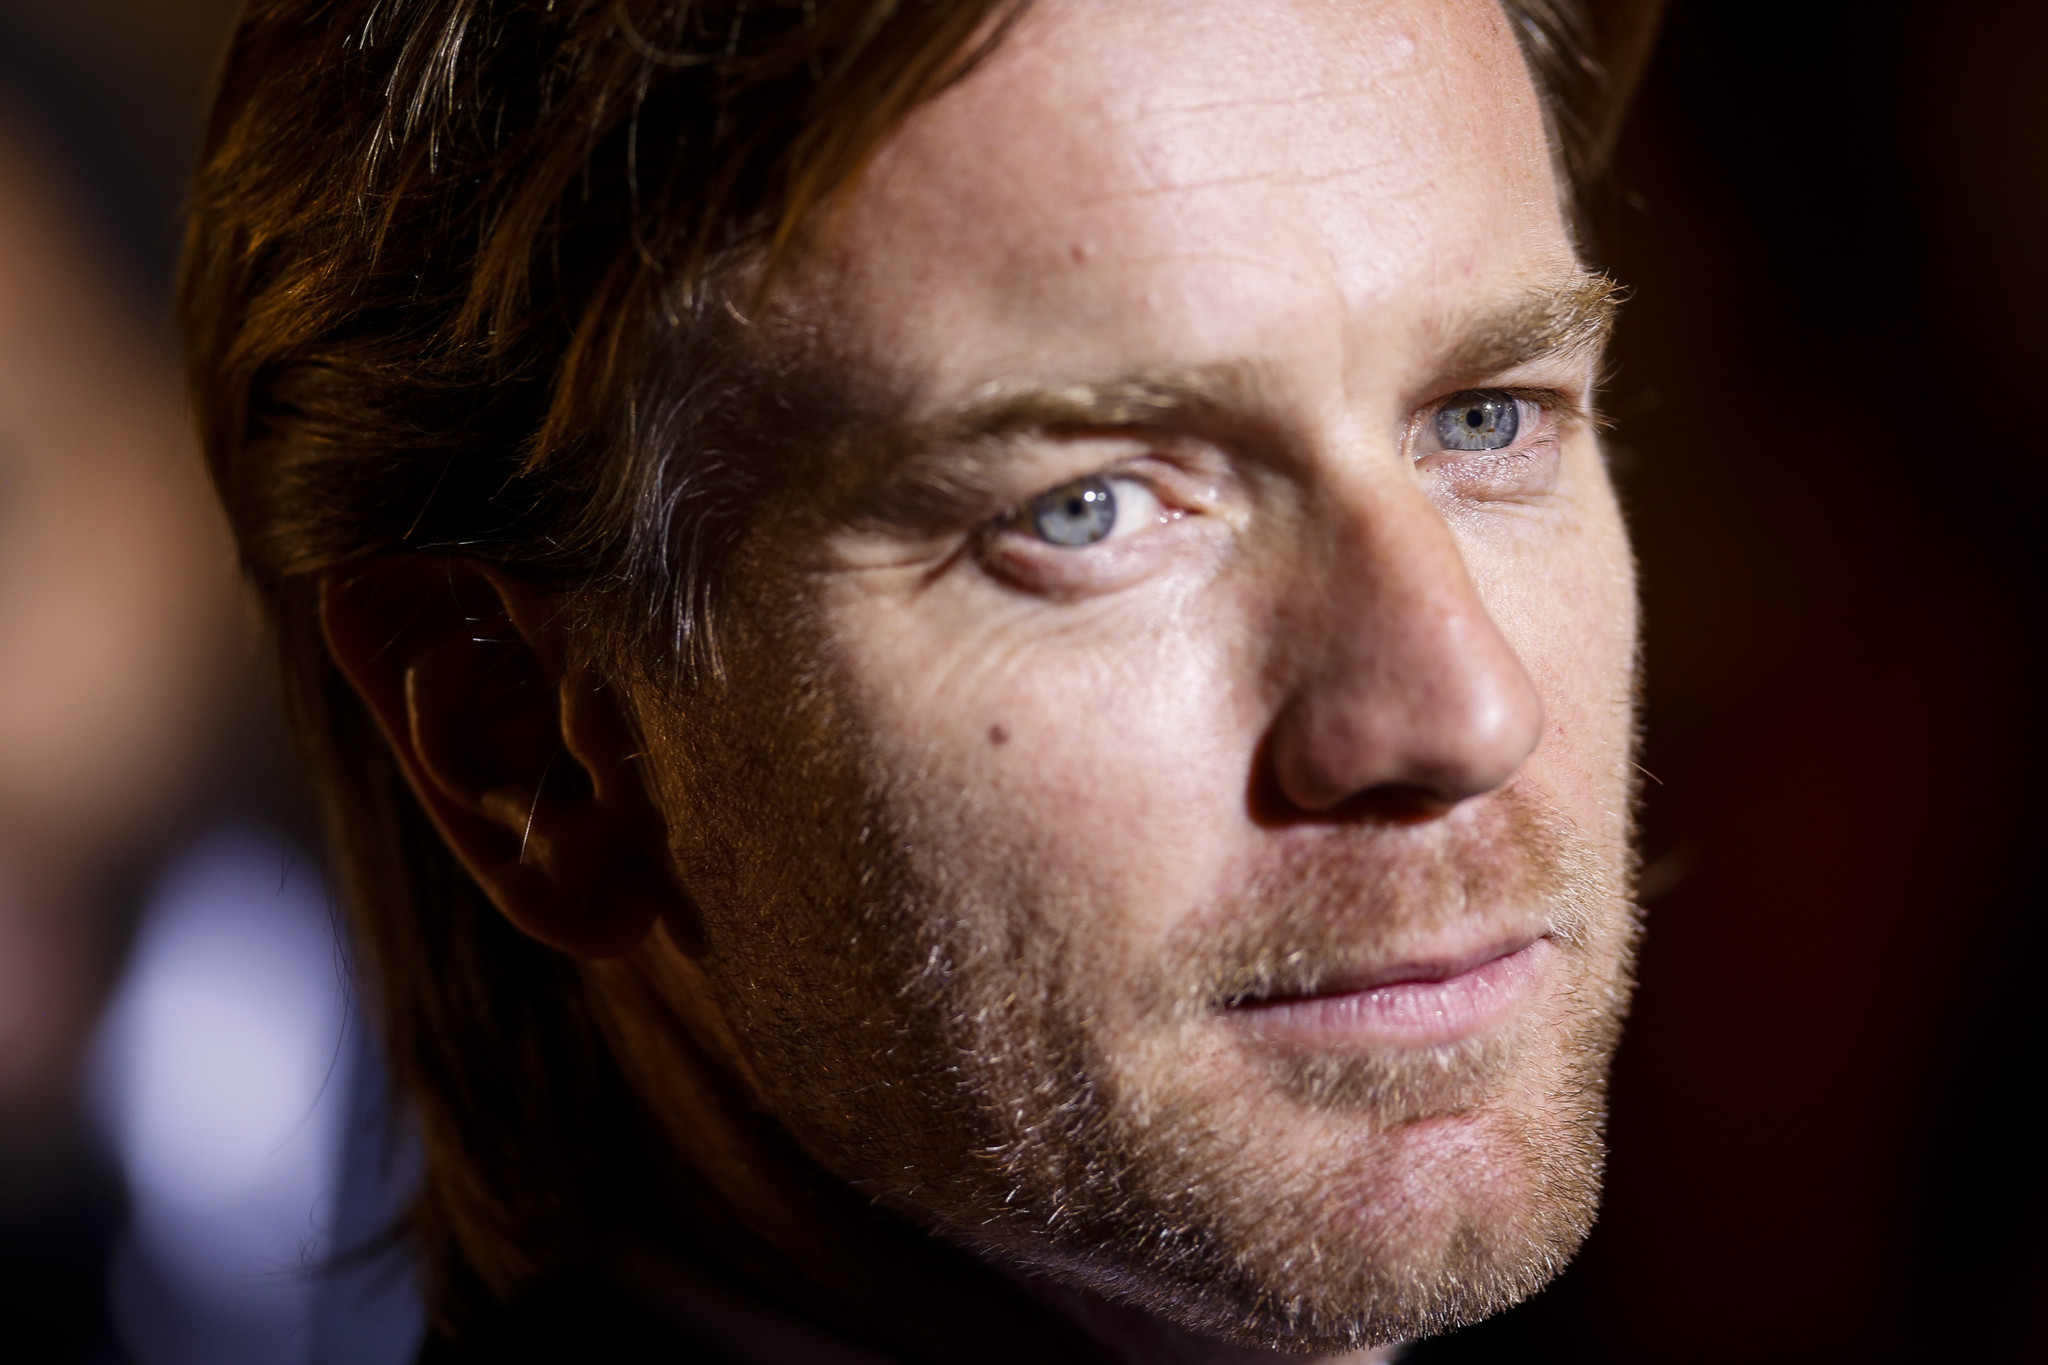 Ewan McGregor to join 'Beauty and the Beast' as Lumiere